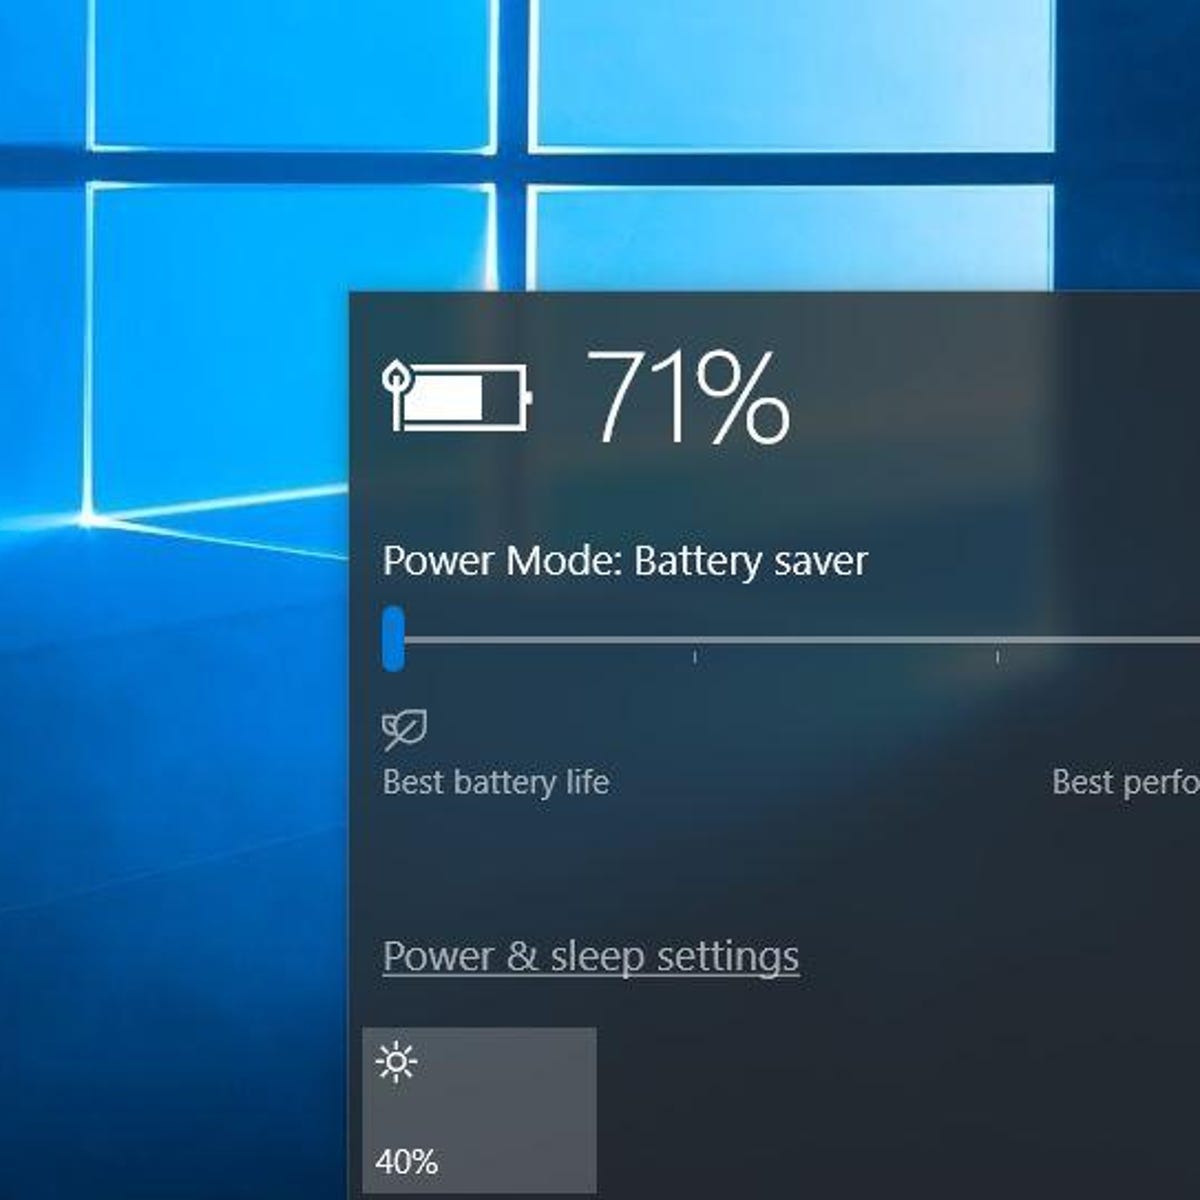 frequentie dronken afdeling 10 tips for better laptop battery life with Windows 10 - CNET